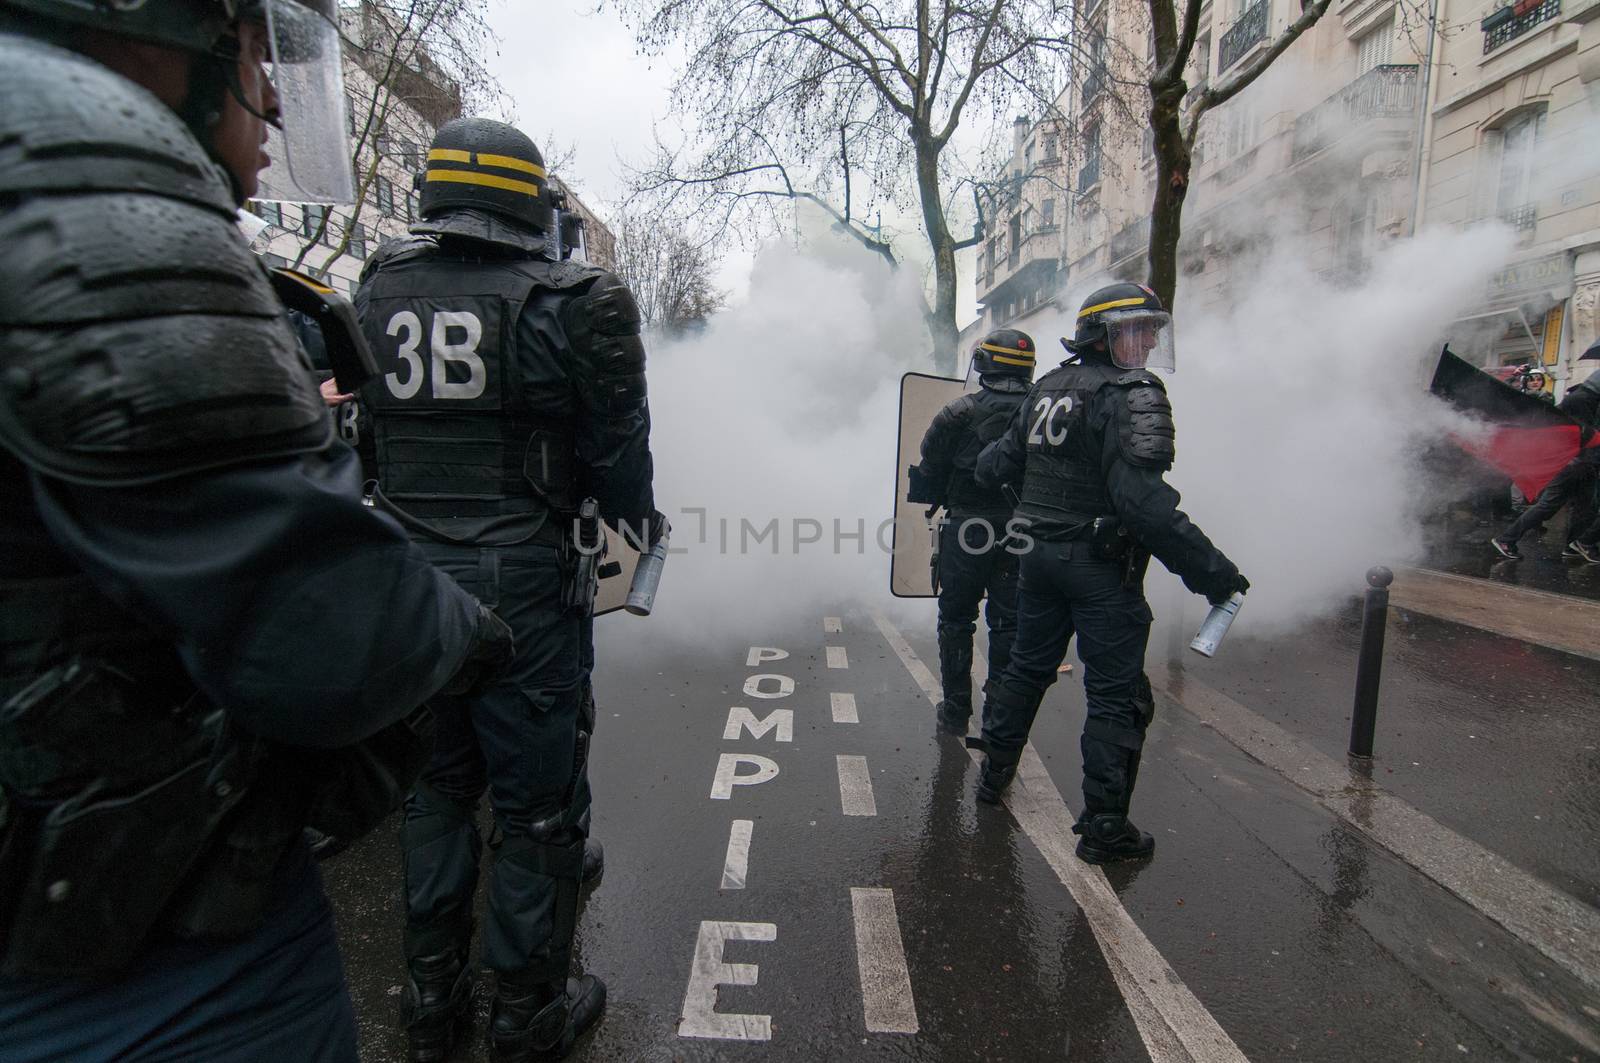 FRANCE, Marseille: Protesters clash with the police during a demonstration against the French government's planned labour law reforms on March 31, 2016 in Paris. France faced fresh protests over labour reforms just a day after the beleaguered government of President Francois Hollande was forced into an embarrassing U-turn over constitutional changes.